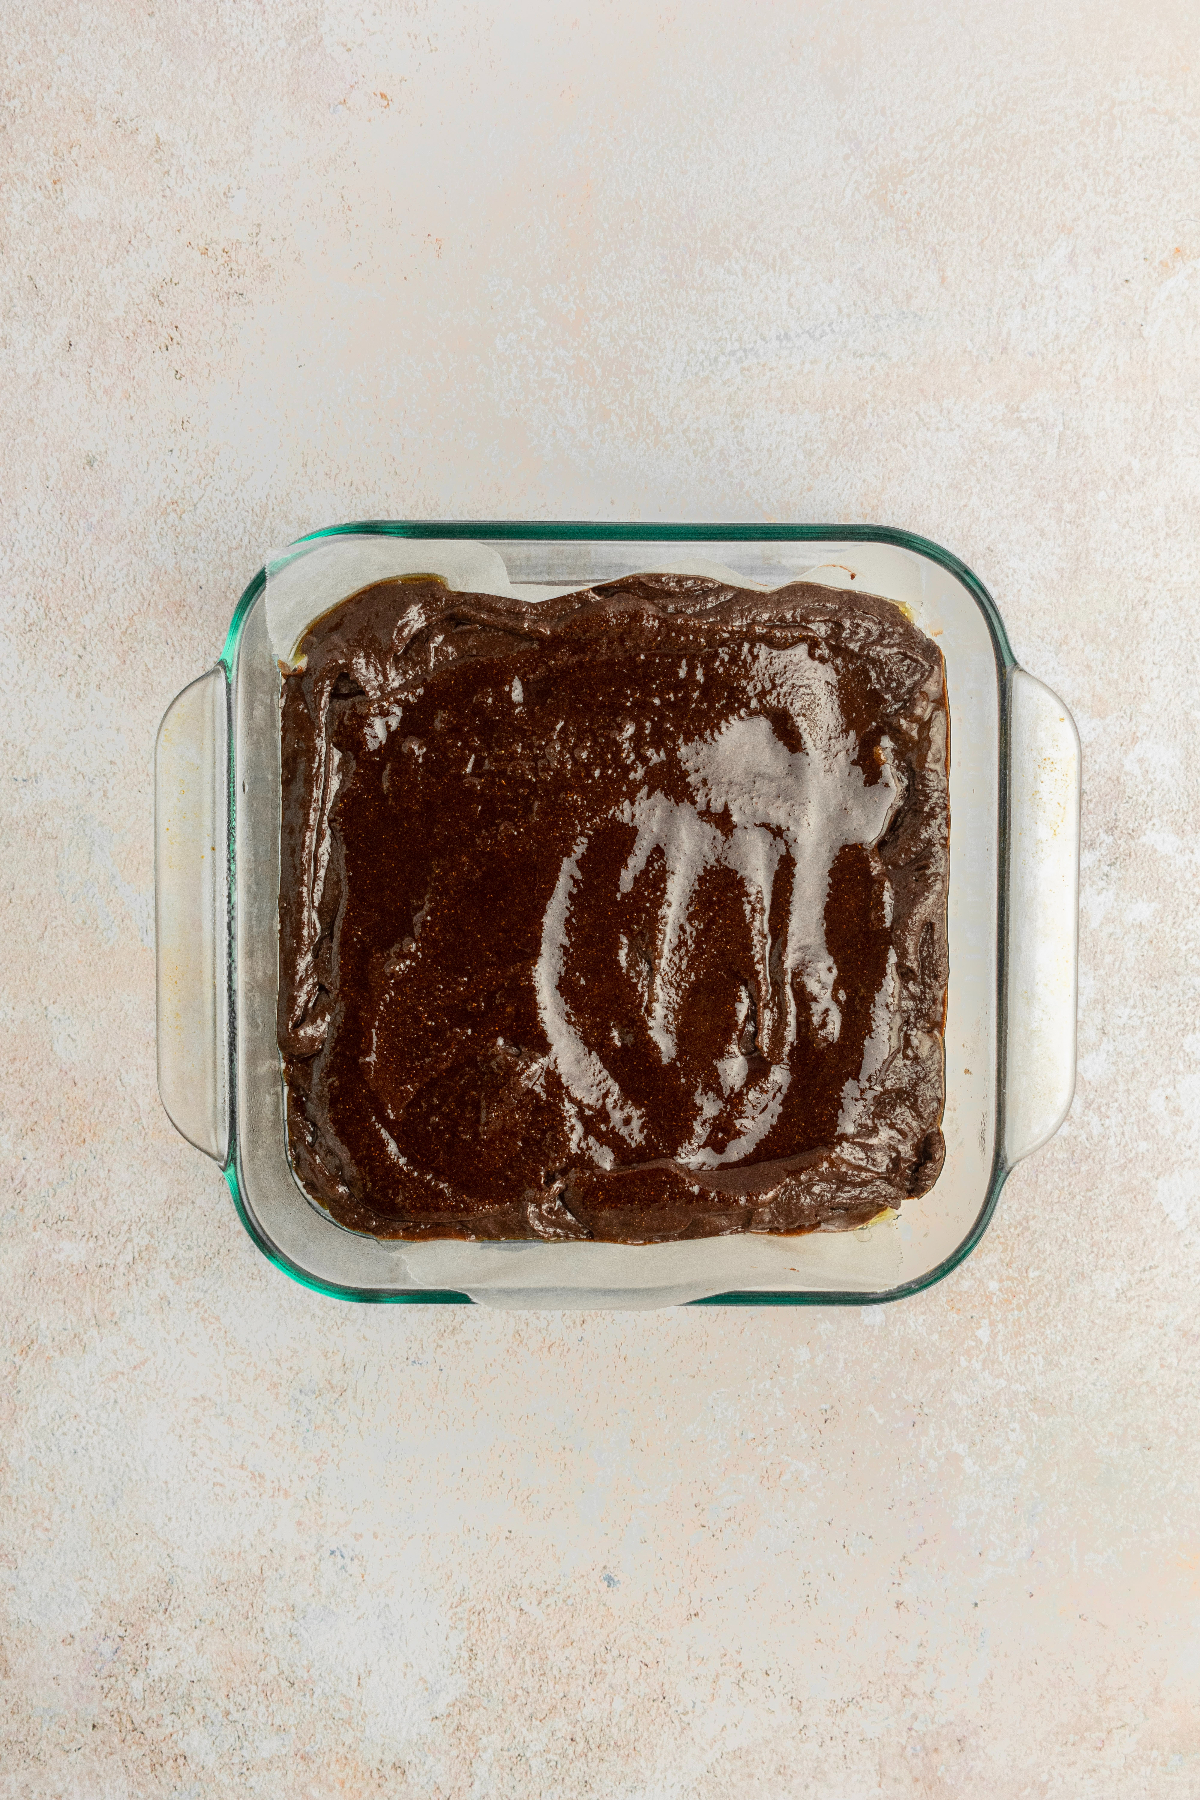 A melted cinnamon topping added to the top of uncooked brownies.